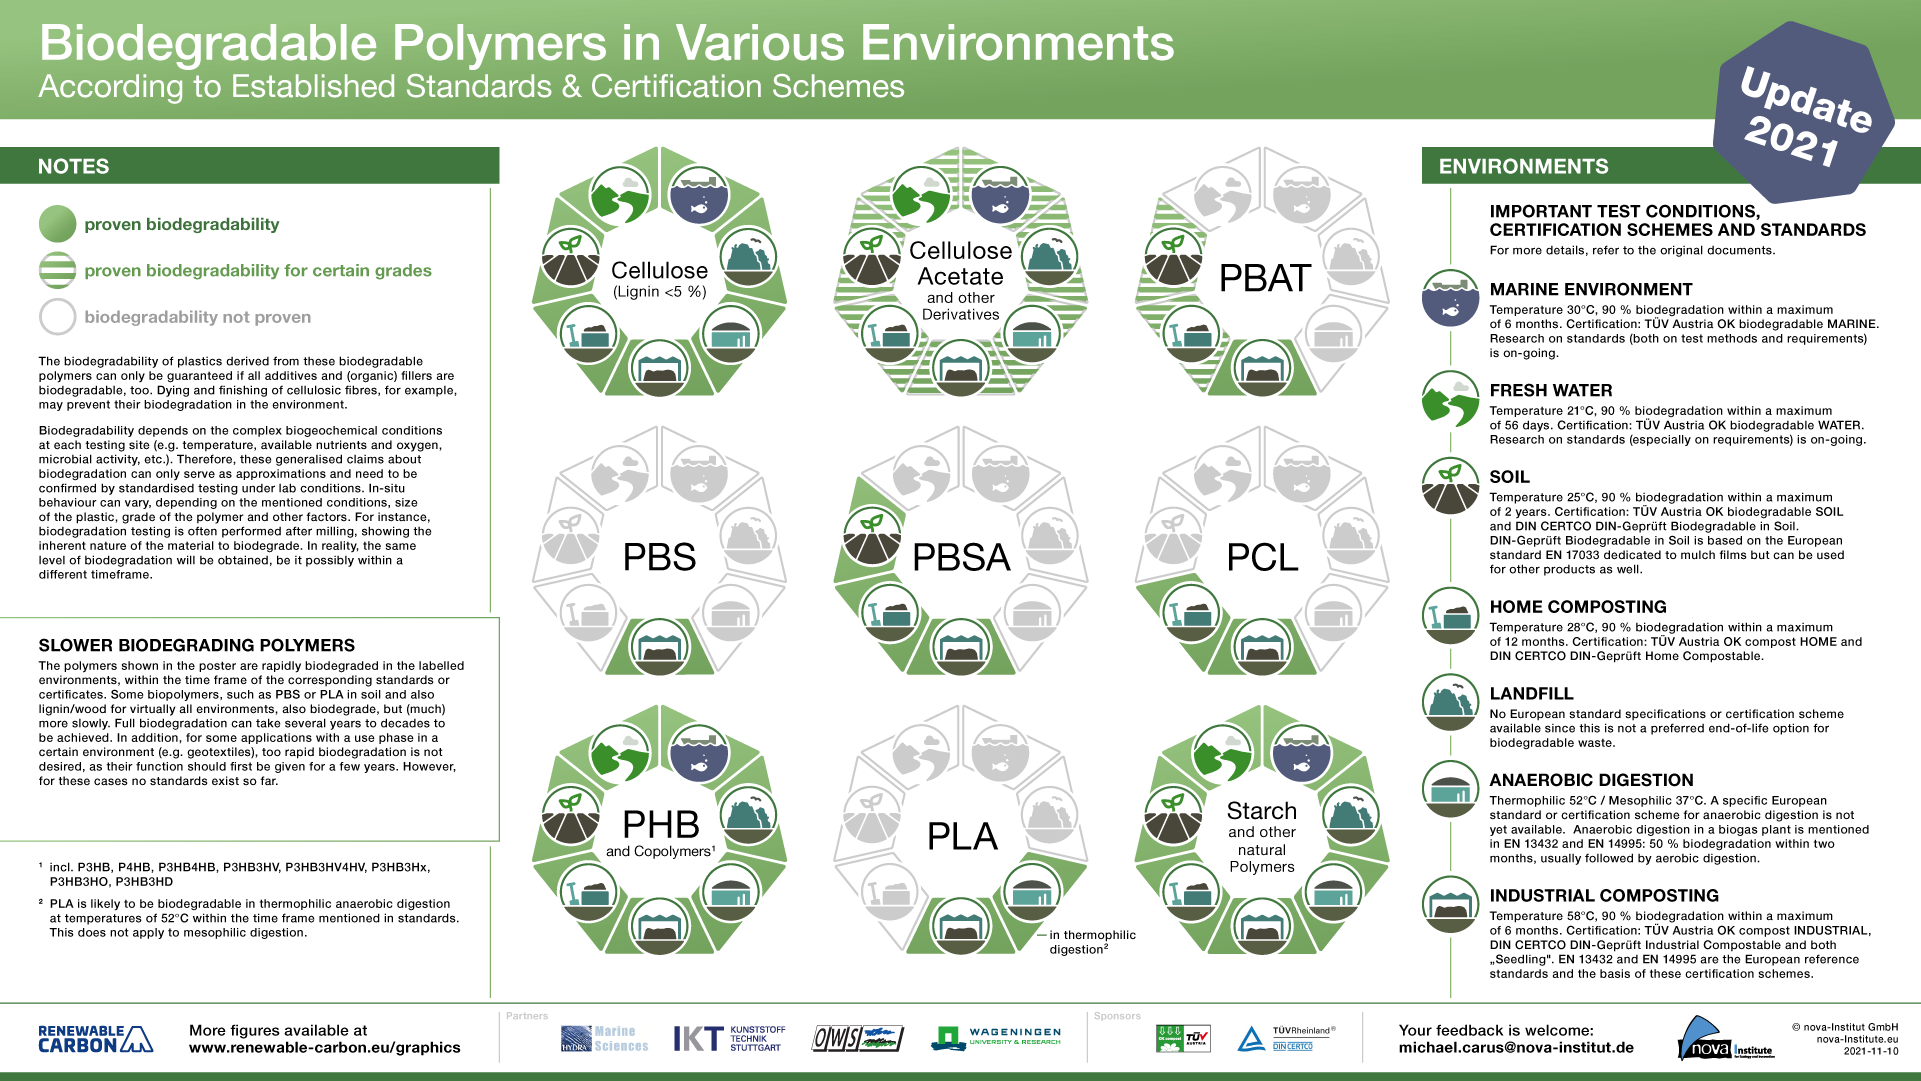 Biodegradable Polymers in Various Environments According to Established Standards and Certification Schemes